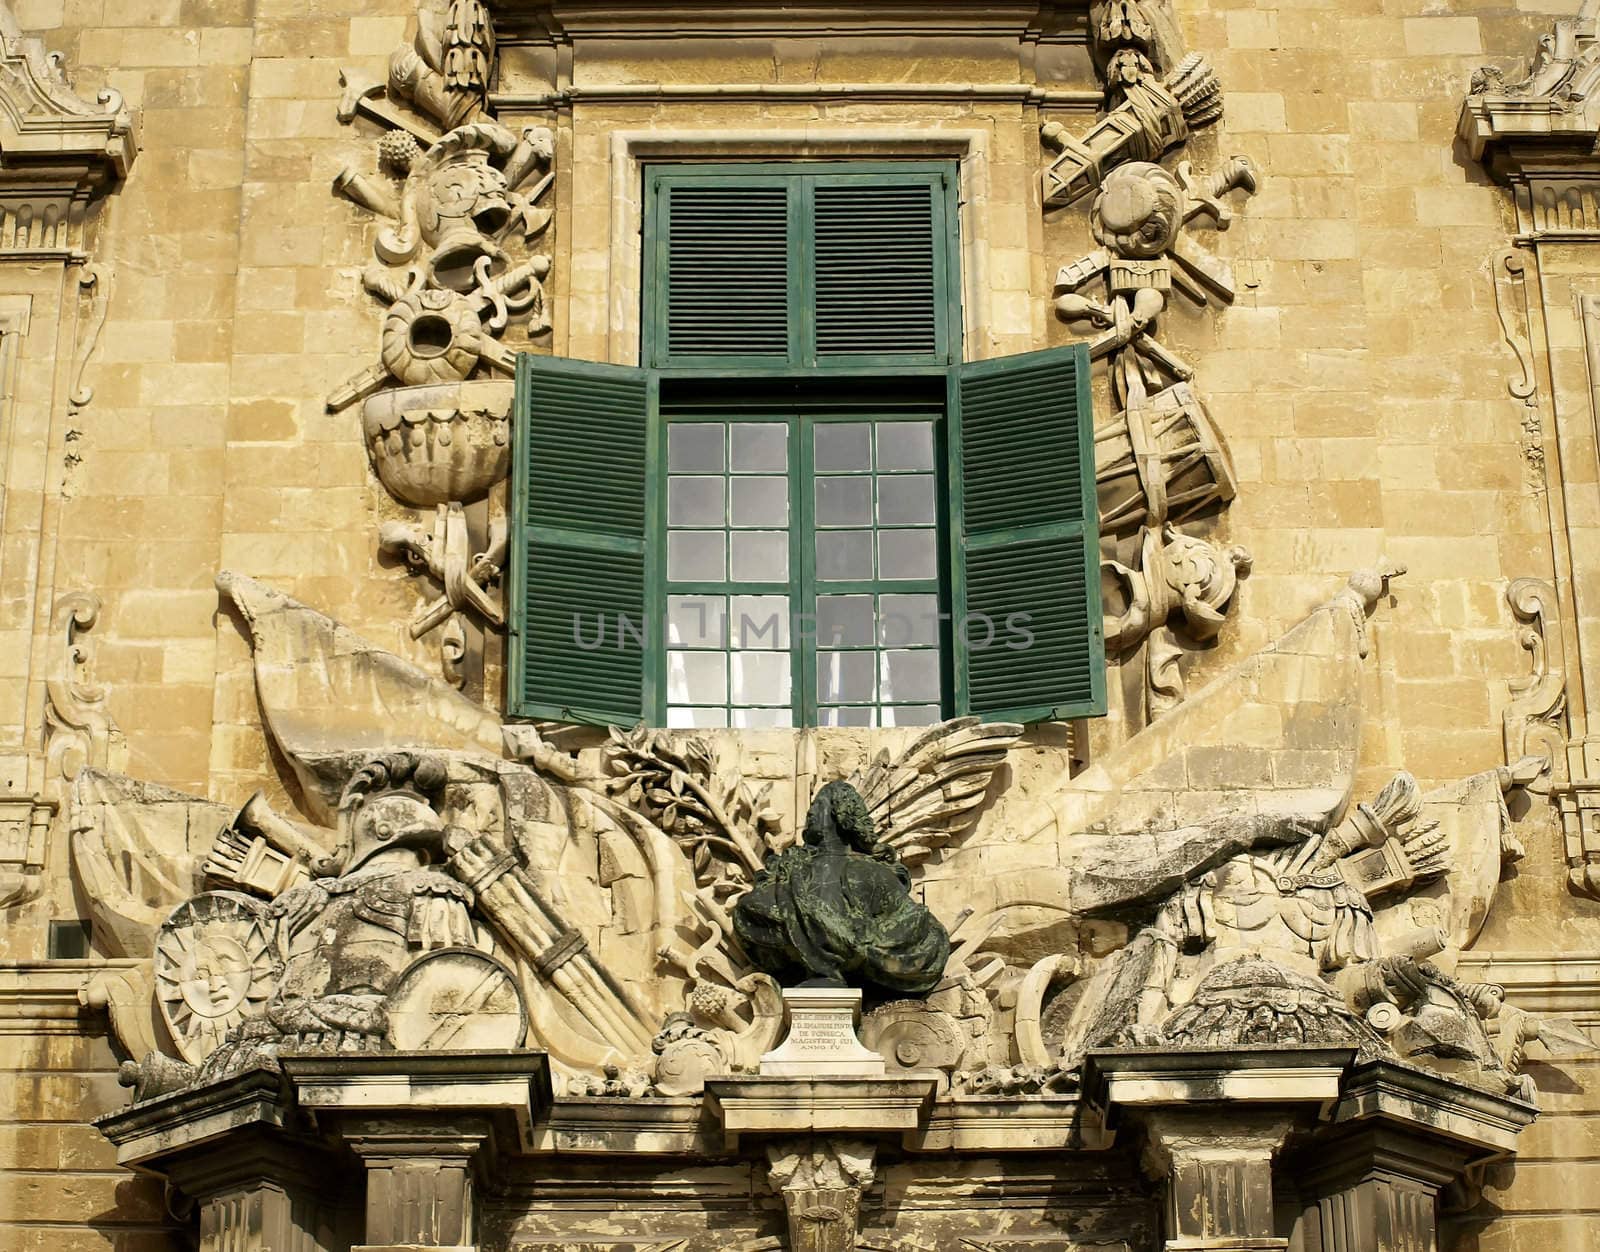 Details of the Palace of the Prime Minister of Malta